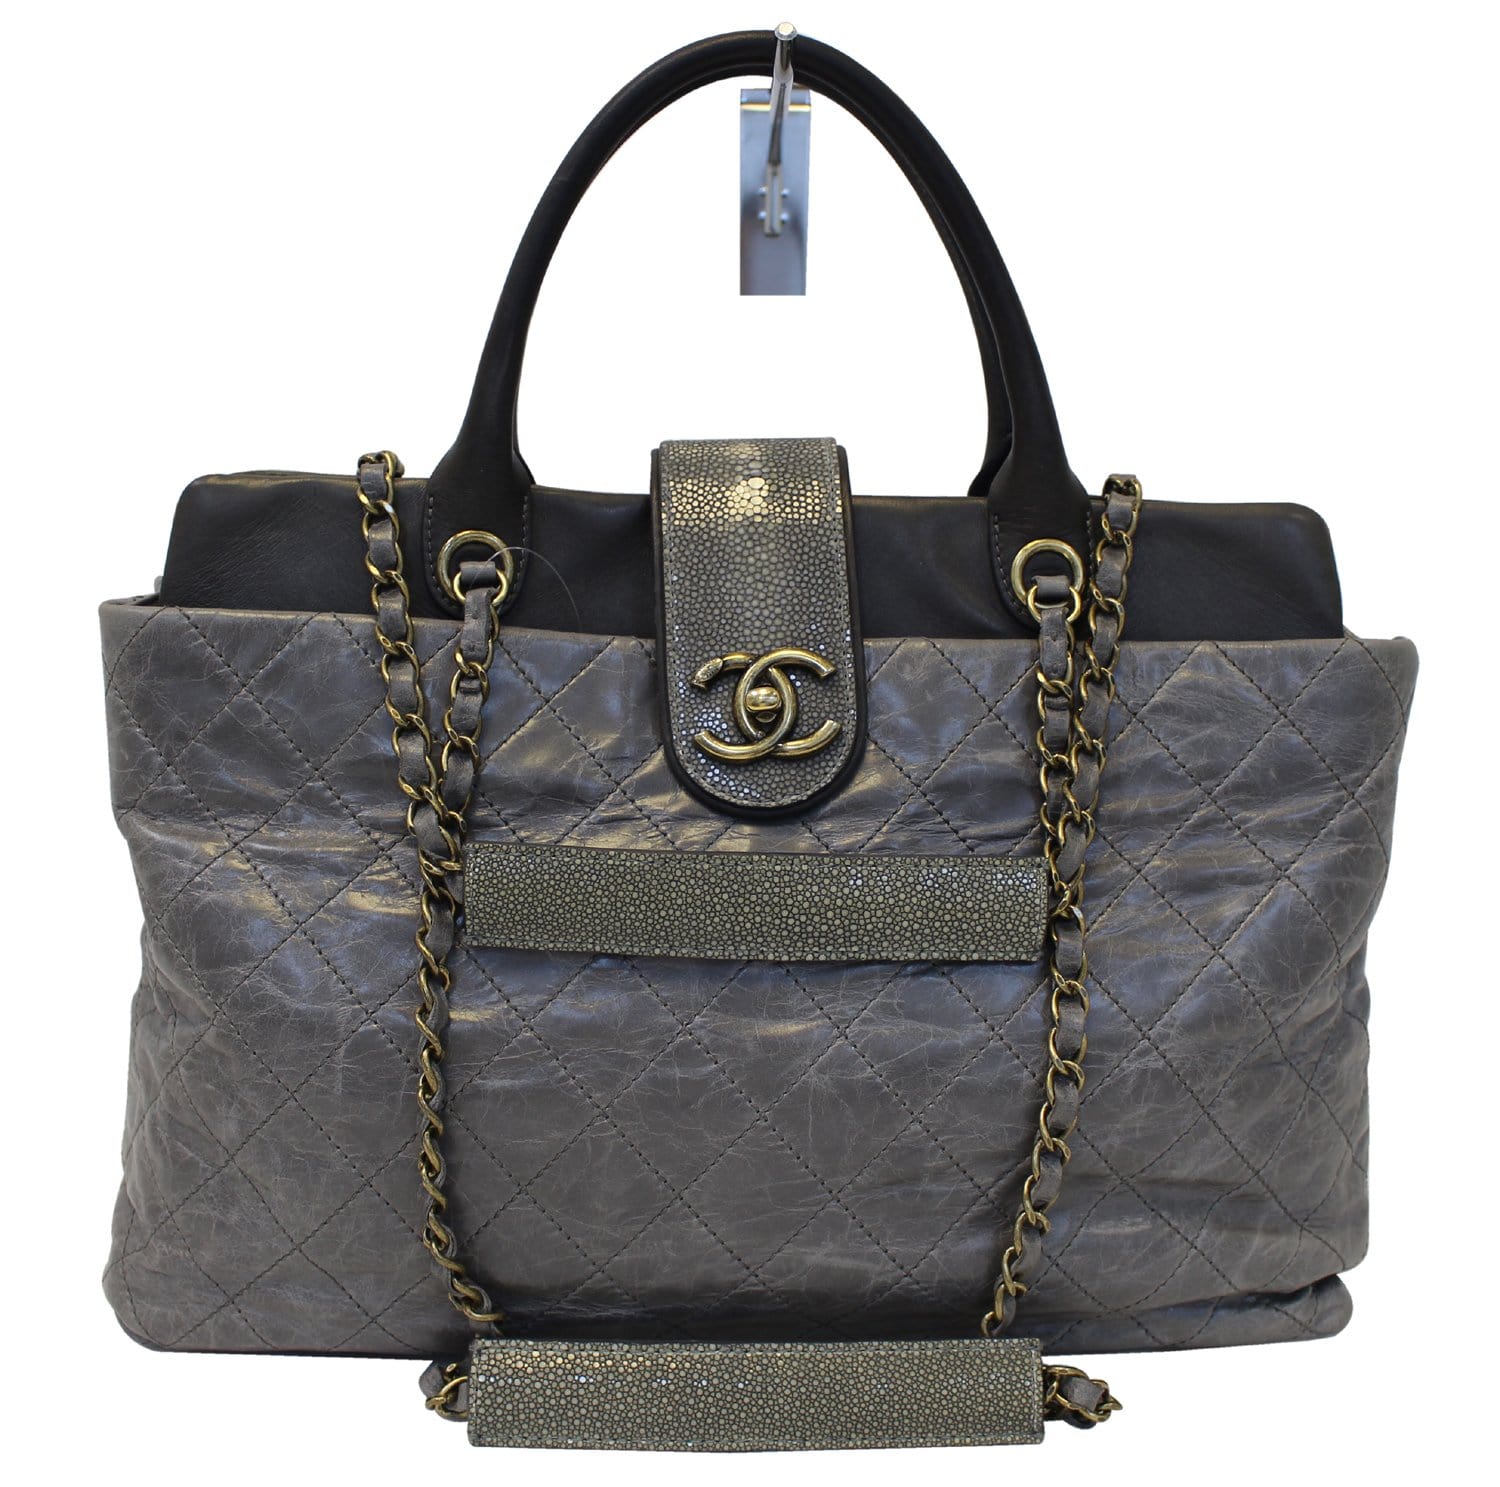 CHANEL Grey Quilted Calfskin Leather Stingray Bindi CC Shopper Tote Ba